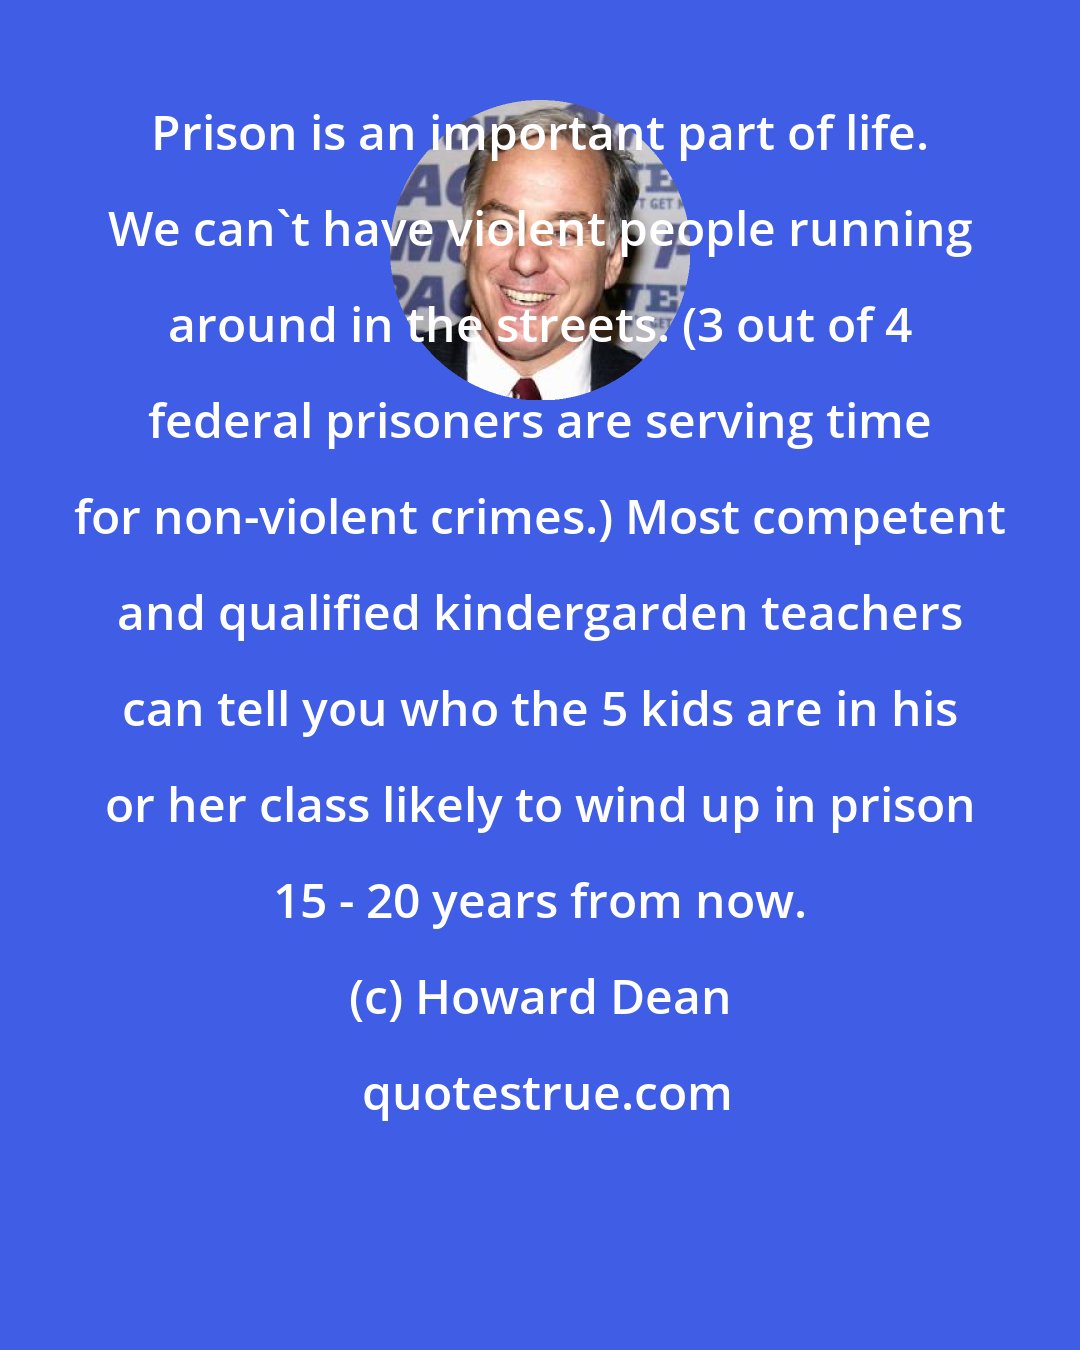 Howard Dean: Prison is an important part of life. We can't have violent people running around in the streets. (3 out of 4 federal prisoners are serving time for non-violent crimes.) Most competent and qualified kindergarden teachers can tell you who the 5 kids are in his or her class likely to wind up in prison 15 - 20 years from now.